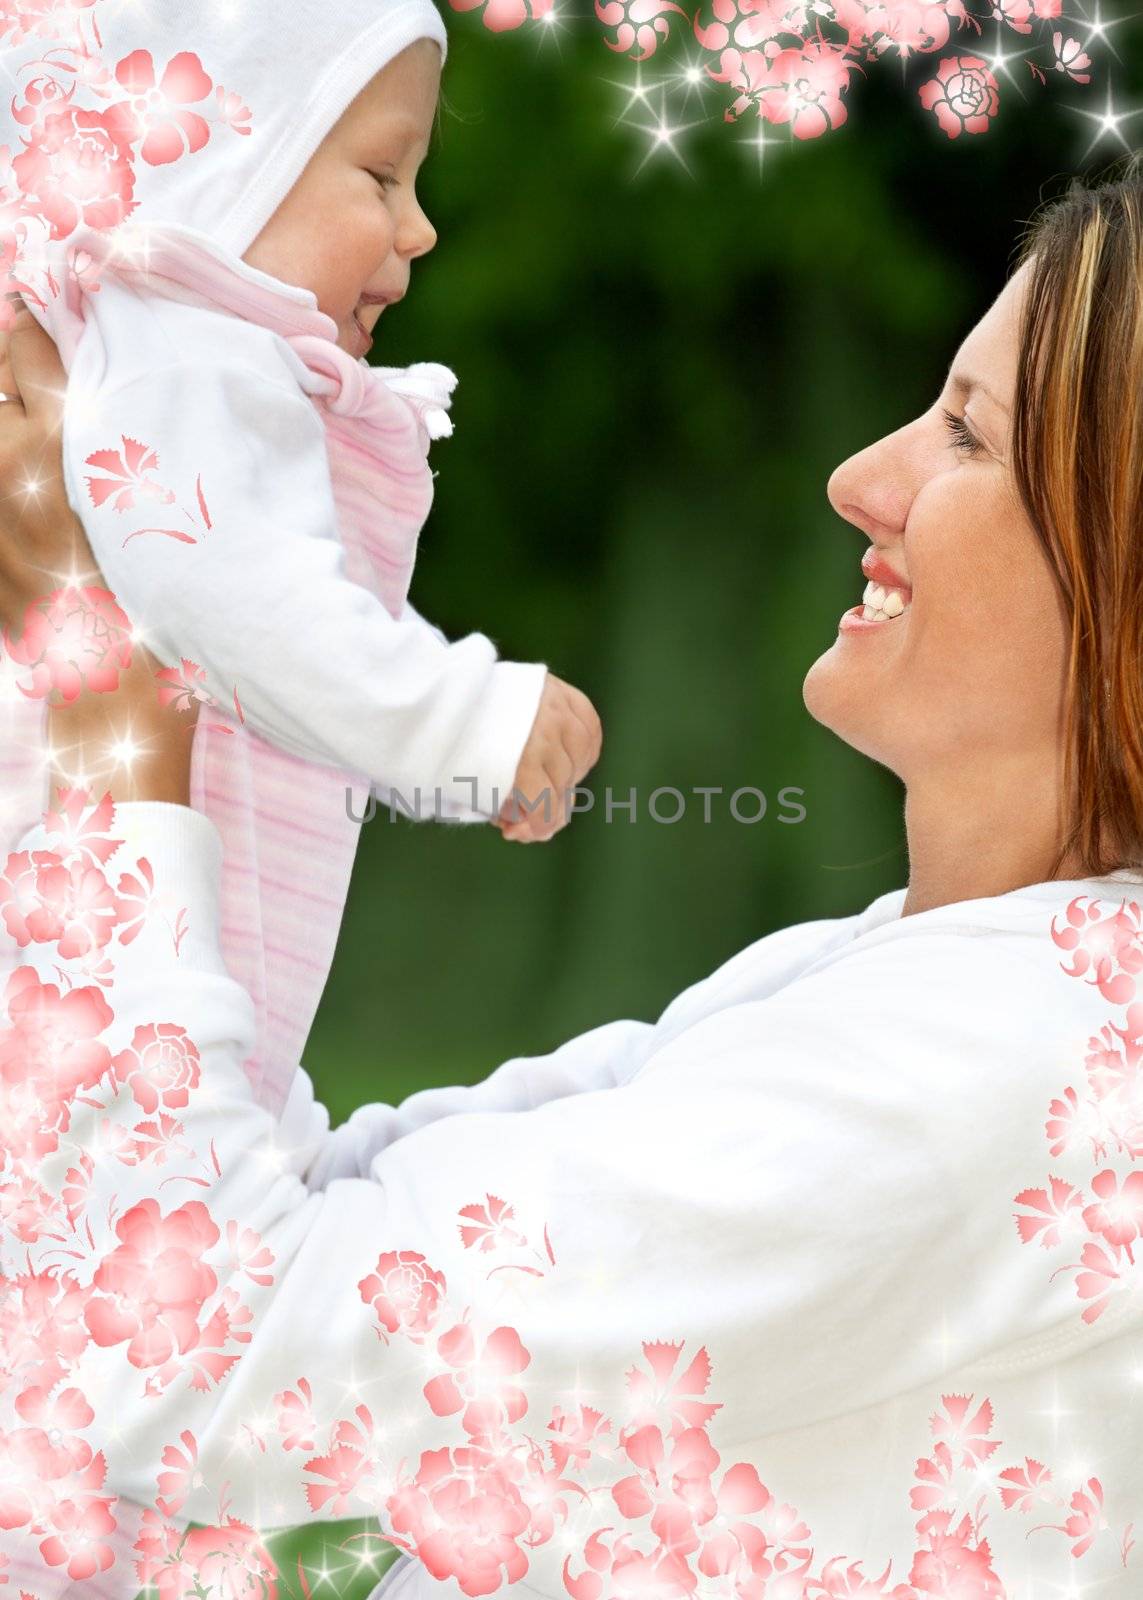 outdoor picture of happy mother with baby and flowers (focus on mom)